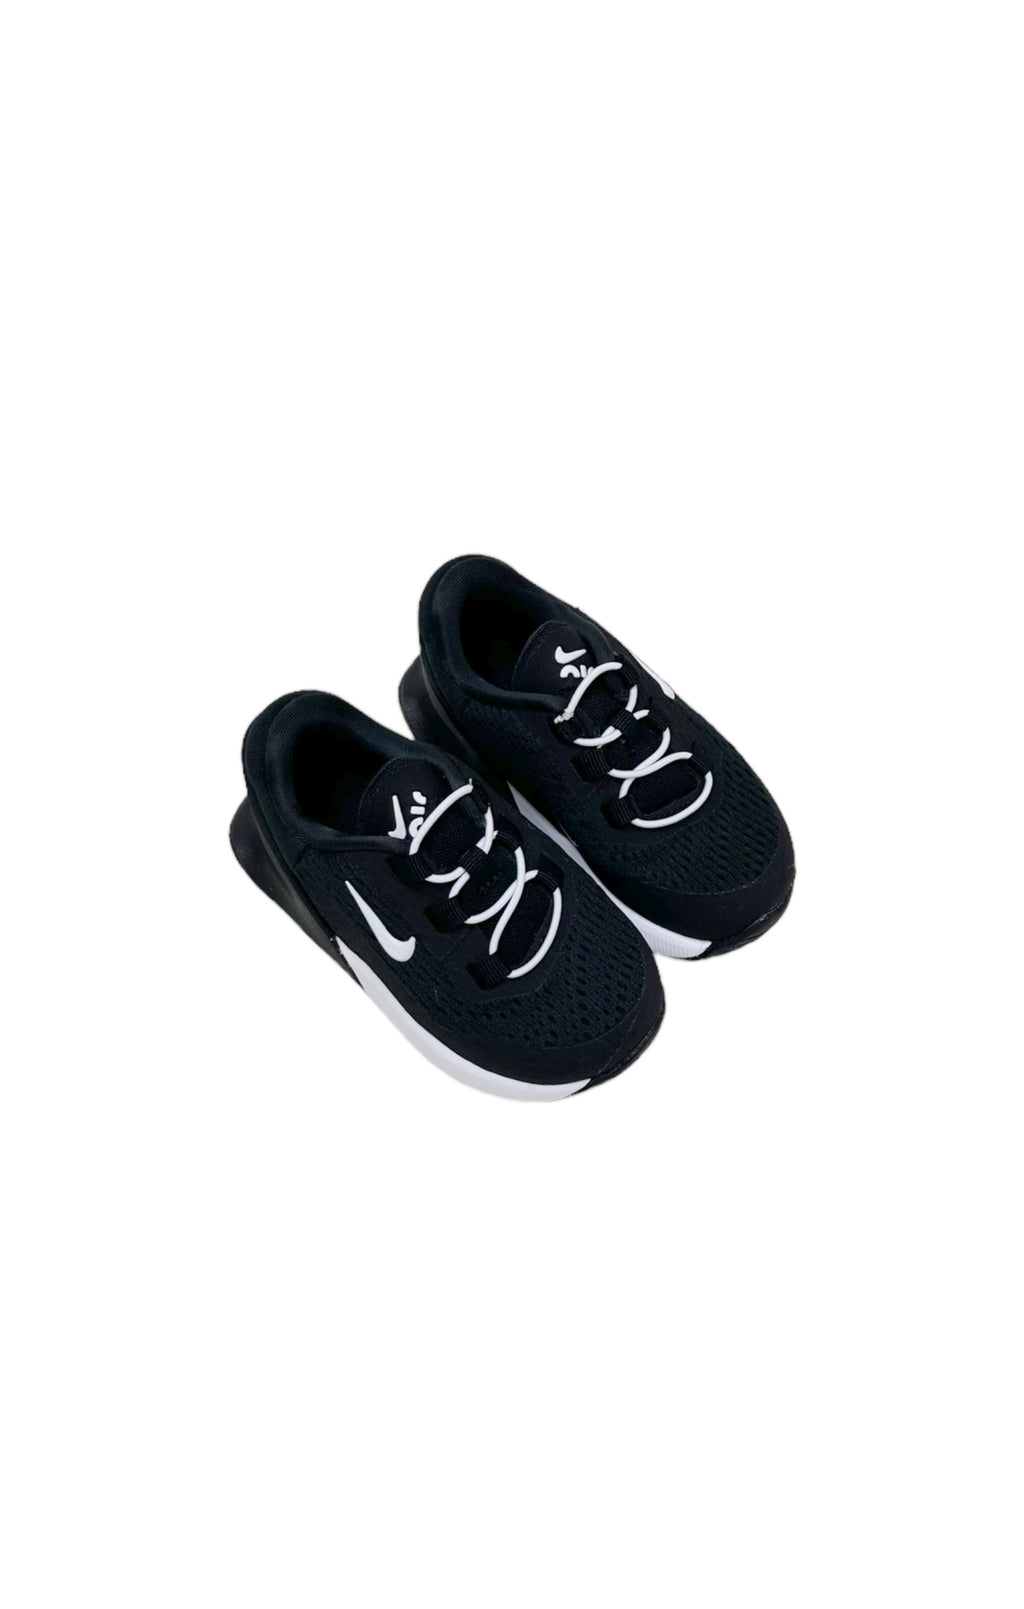 NIKE Sneakers Size: Infant US 6C